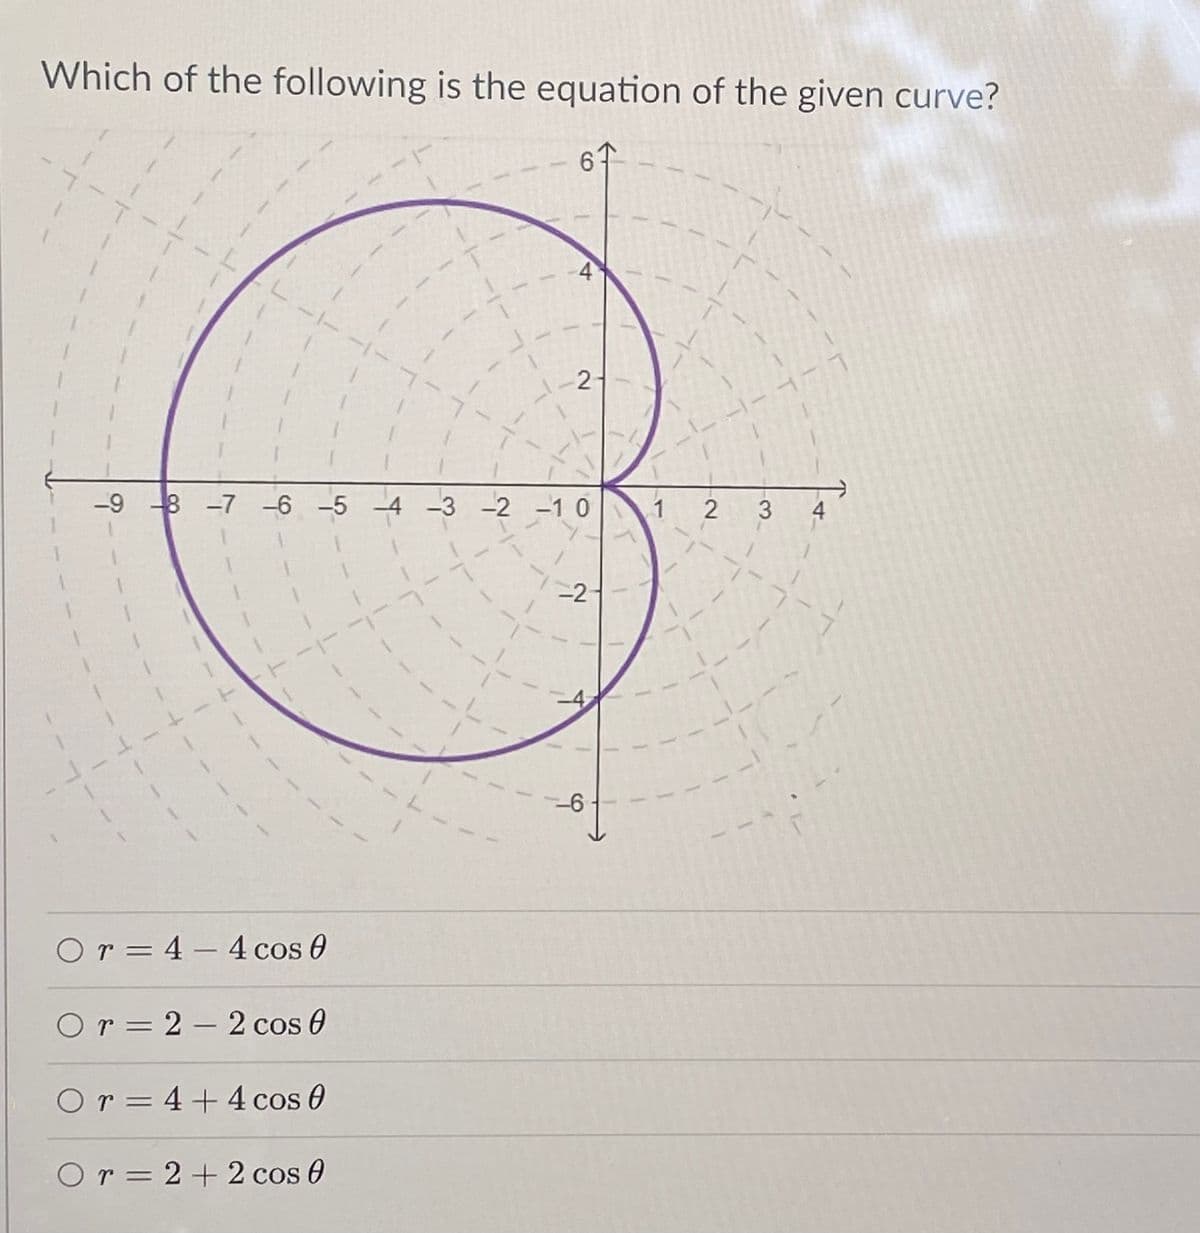 Which of the following is the equation of the given curve?
7.
1
2
4
-9 8 -7 -6 -5 -4 -3 -2 -1 0
-2-
-6
Or = 4 – 4 cos 0
Or = 2 – 2 cos 0
-
Or = 4+4cos 0
Or = 2 + 2 cos 0
3.
4)
